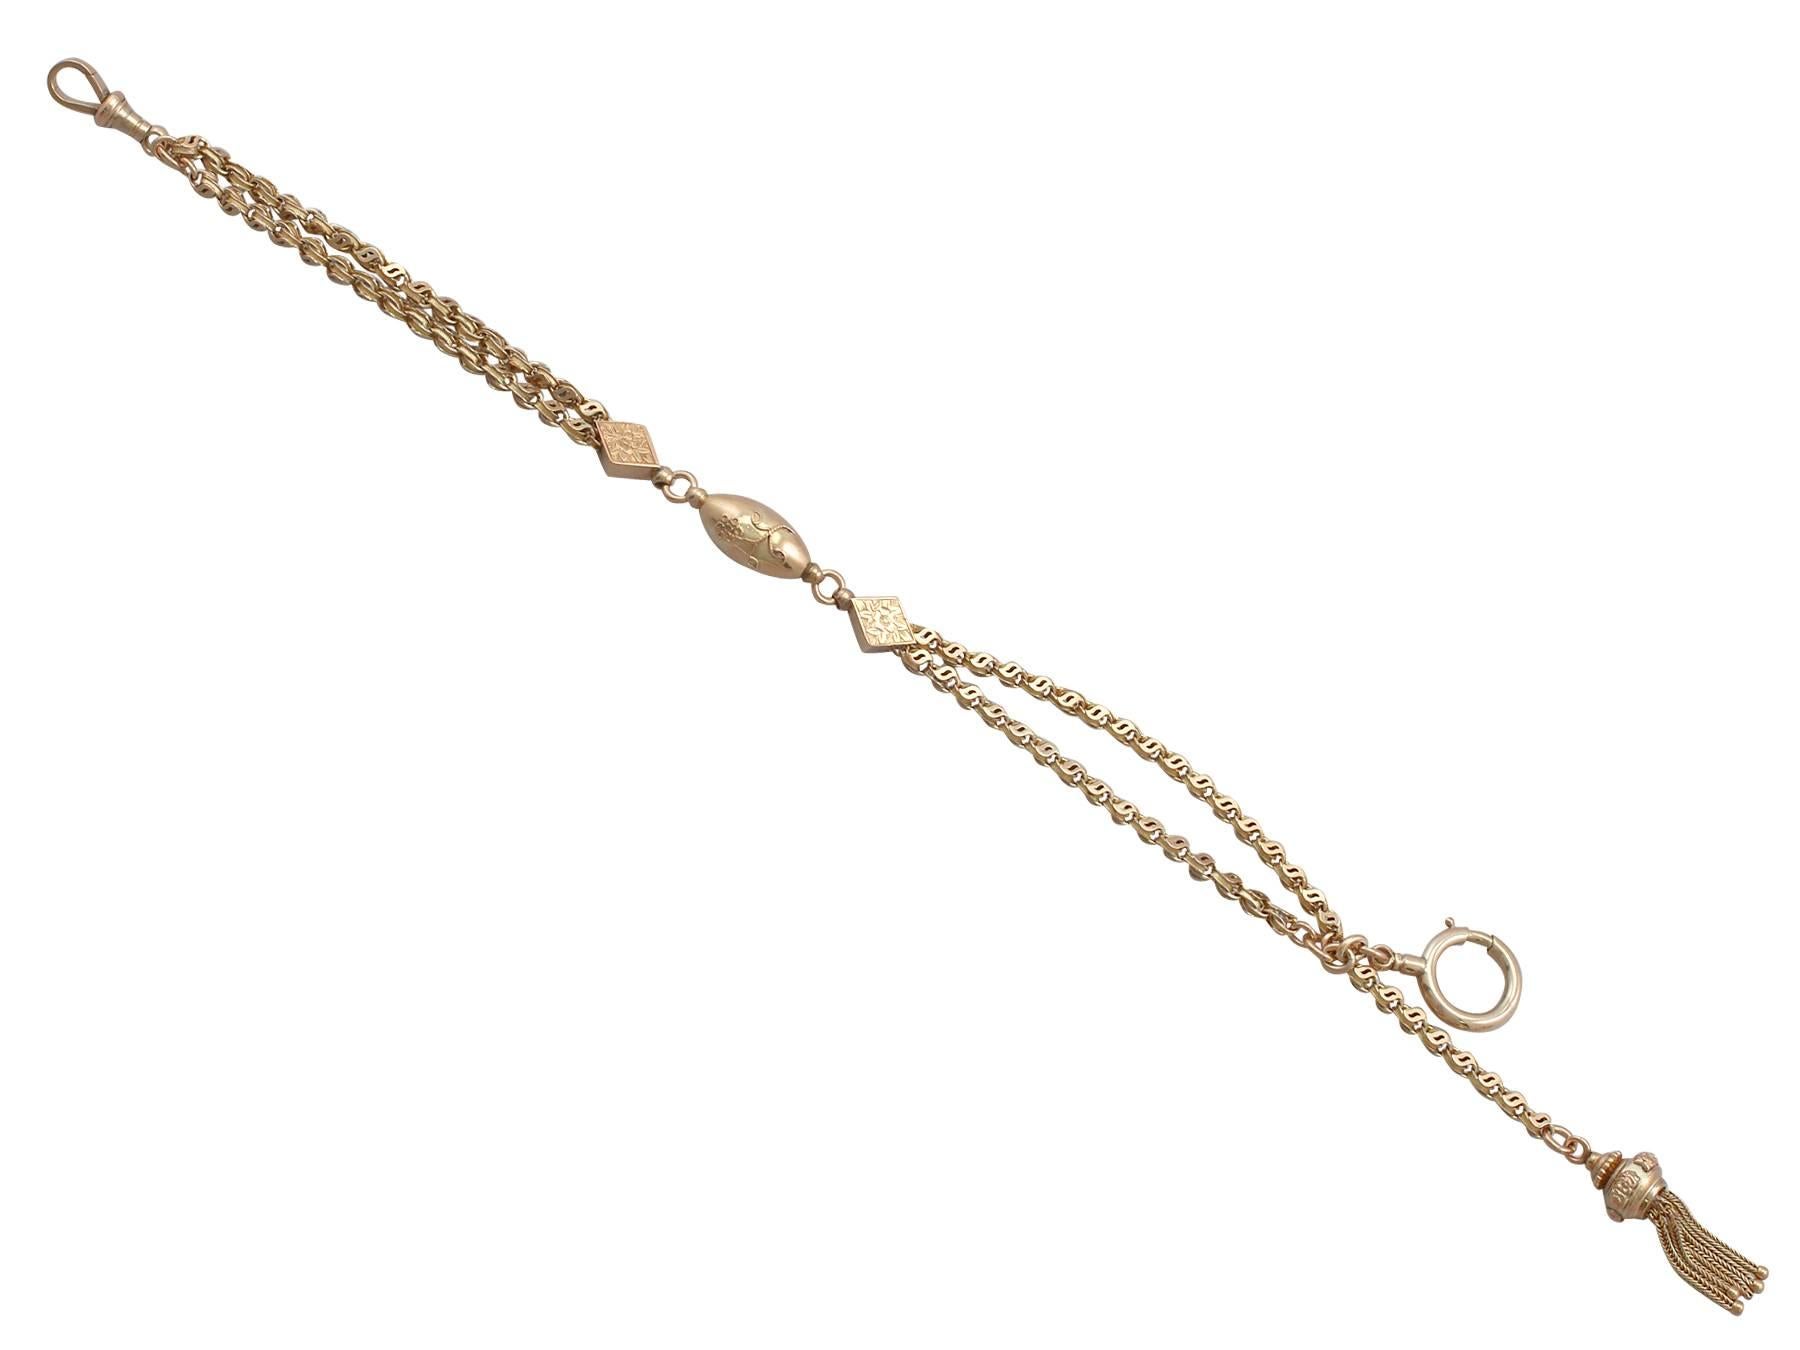 A fine and impressive antique Victorian 9 carat yellow gold ladies 'Albertina' watch chain; part of our diverse antique jewellery and estate jewelry collections.

This fine and impressive Victorian ladies watch chain has been crafted in 9 ct yellow